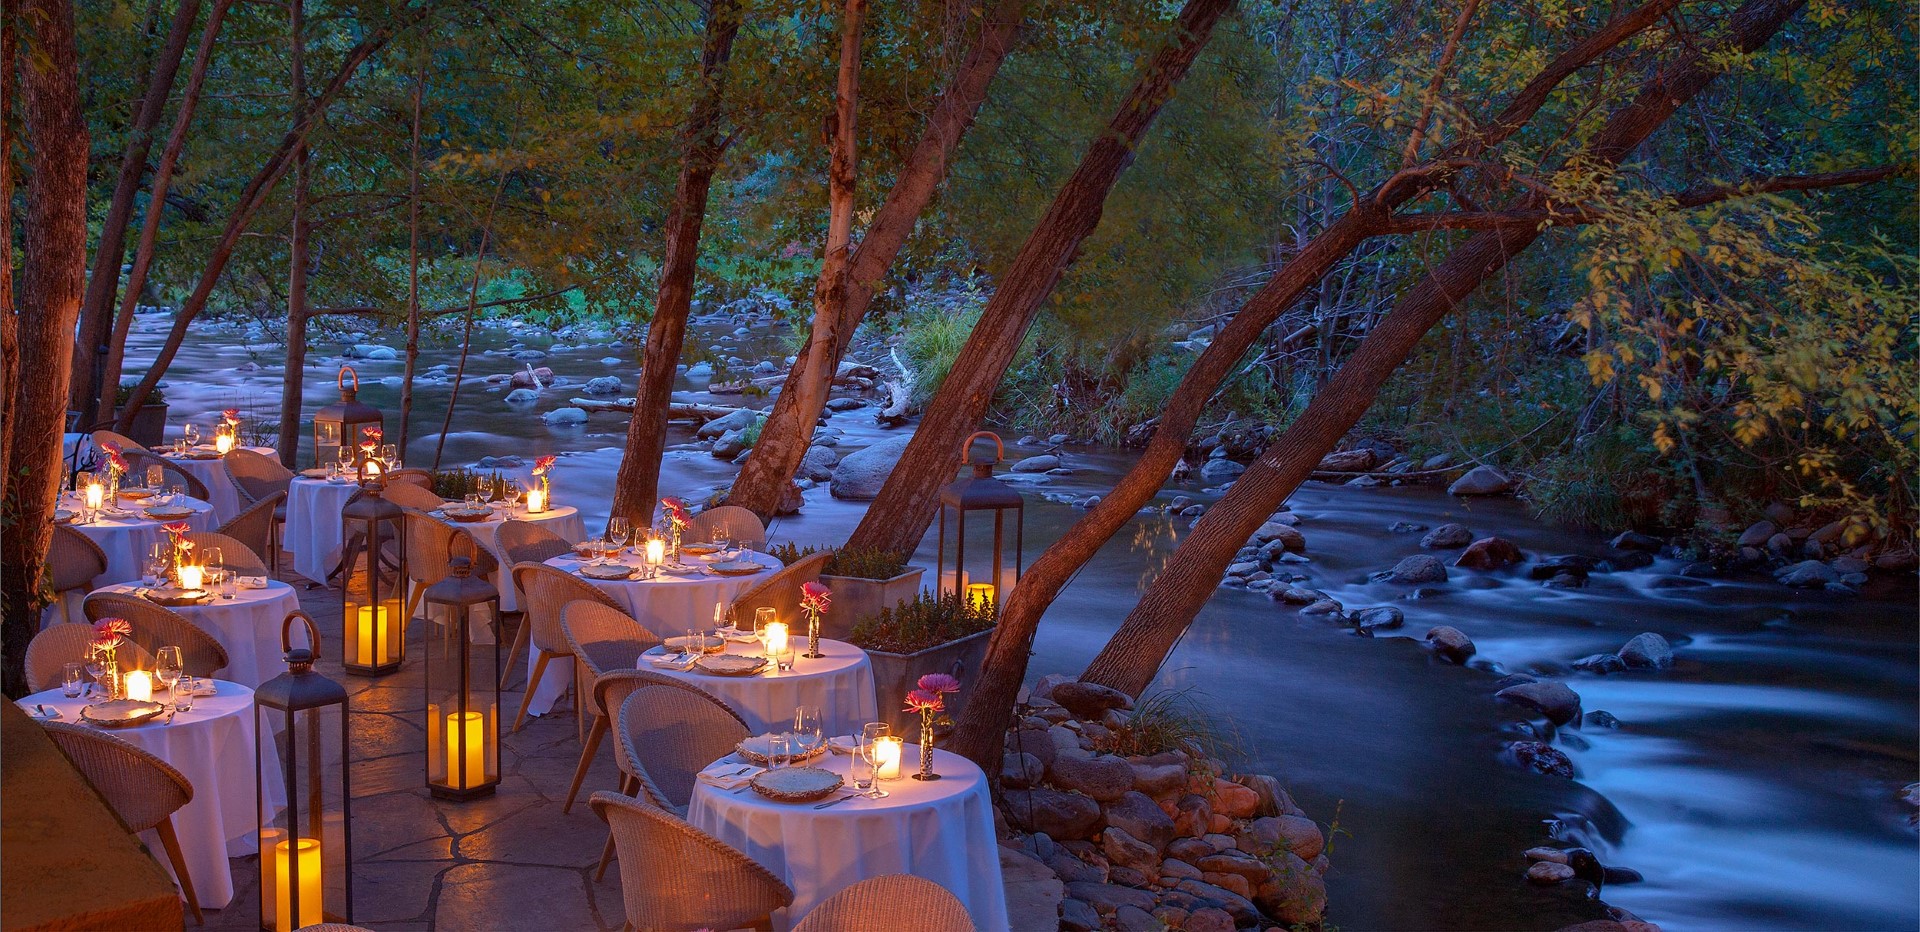 Romantic, cozy, and impeccable are words that only begin to describe Cress on Oak Creek, Sedona’s premiere dining destination and part of L’Auberge de Sedona. For dinner, select from a three- or four-course menu. The resort’s Etch Kitchen/Bar also serves dinner, along with breakfast and lunch. Photo courtesy L’Auberge de Sedona.